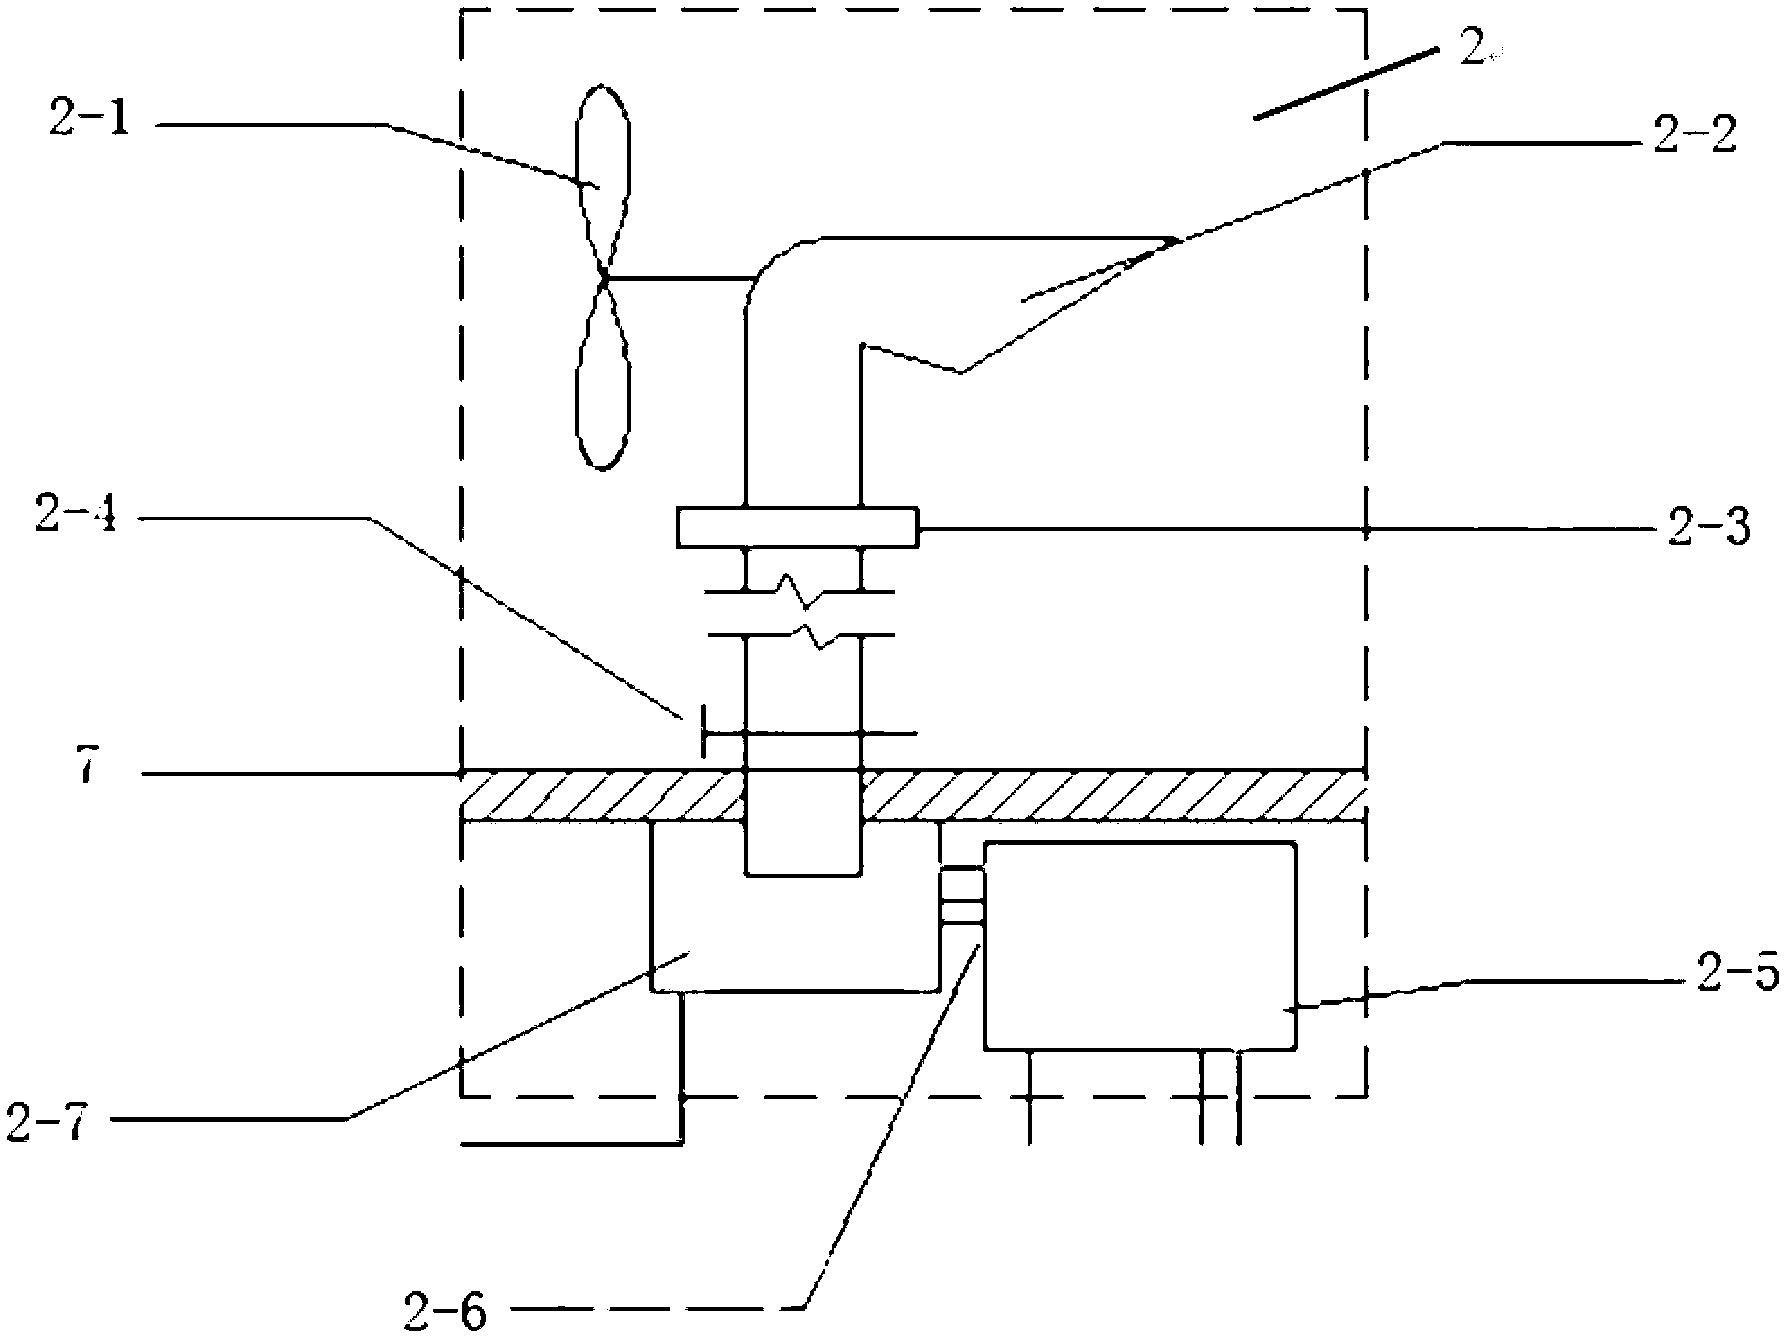 Air managing system of lithium-air secondary battery pack